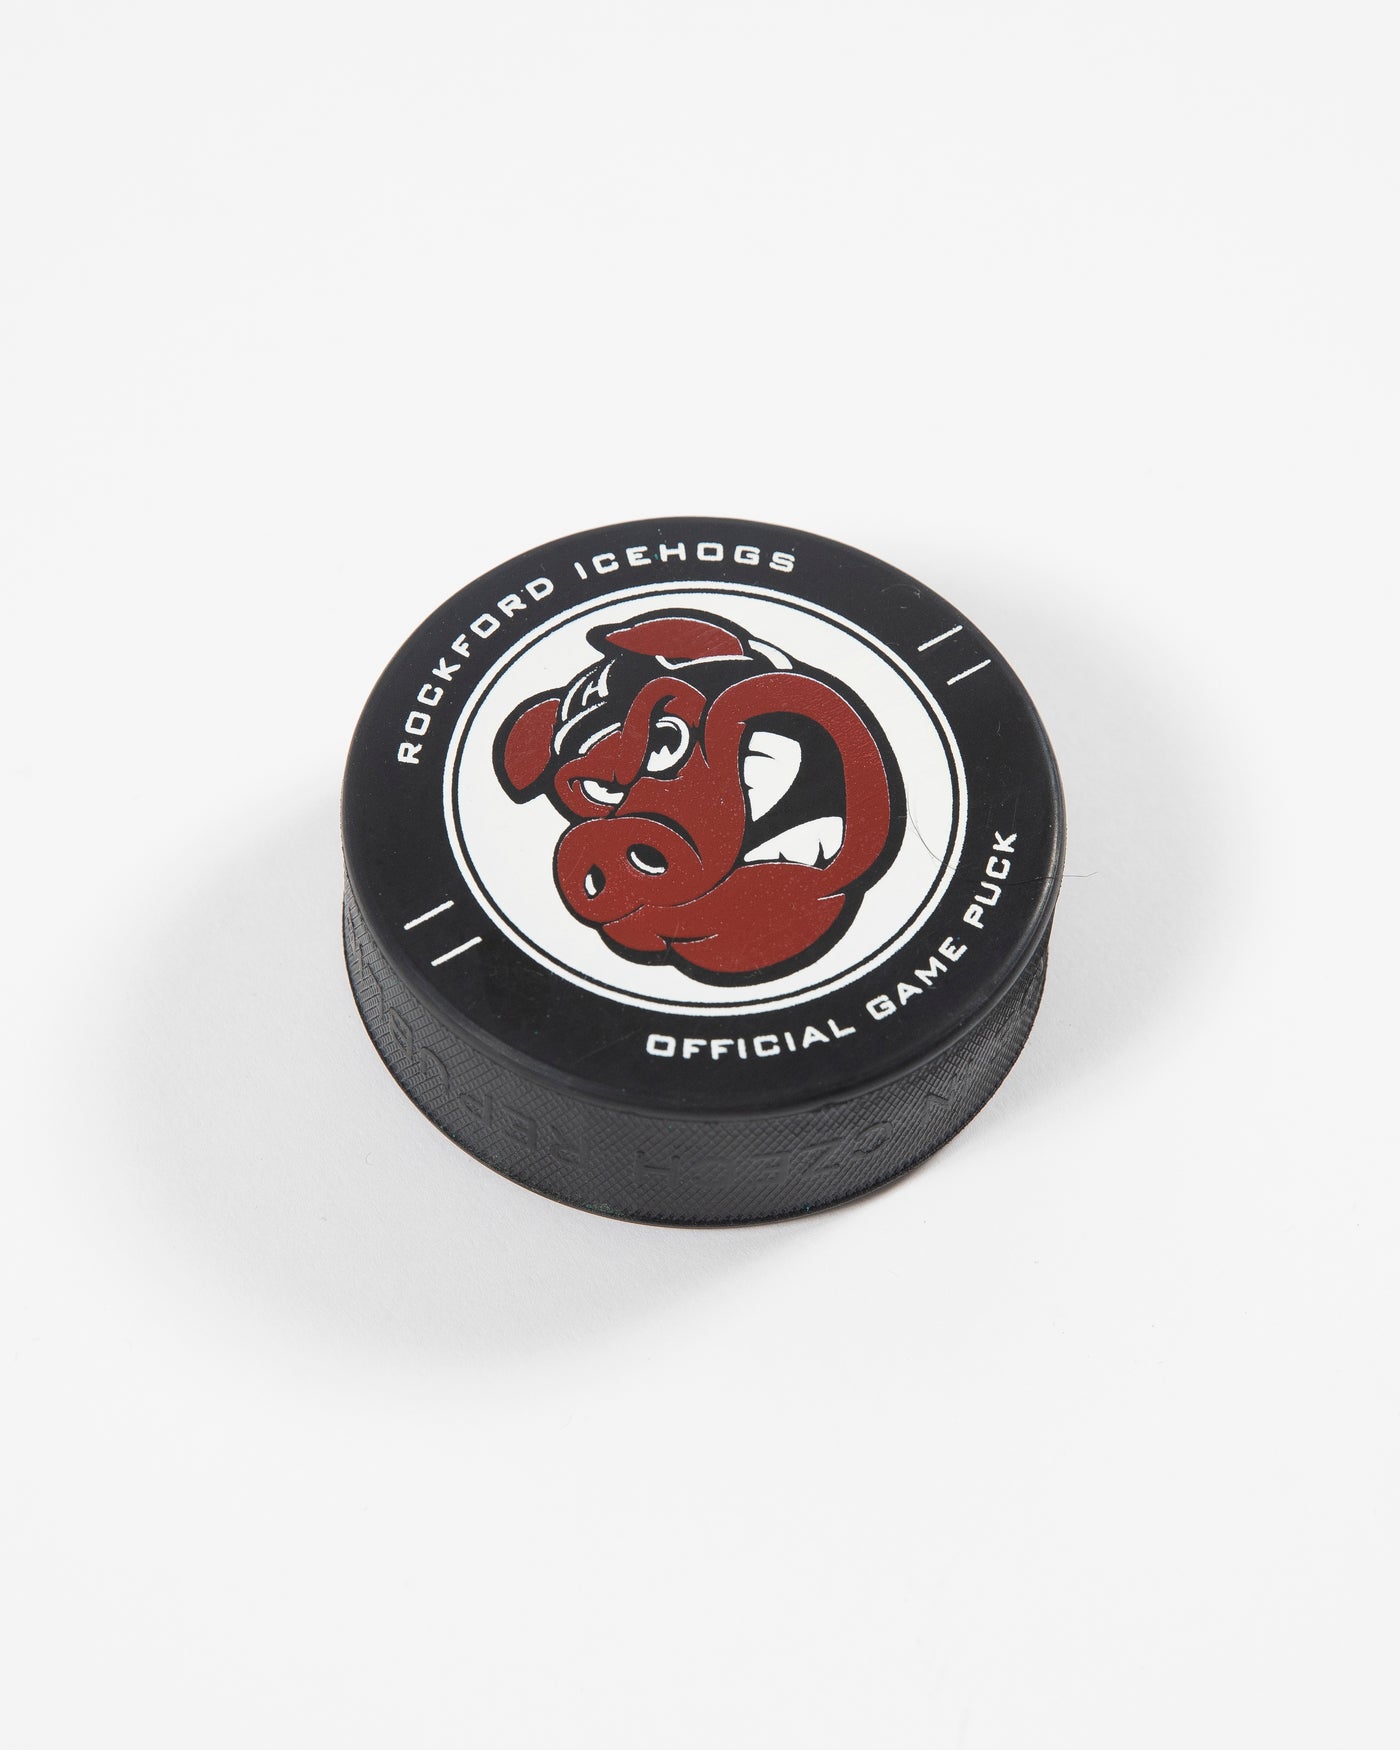 Black Rockford IceHogs official game hockey puck - angled lay flat